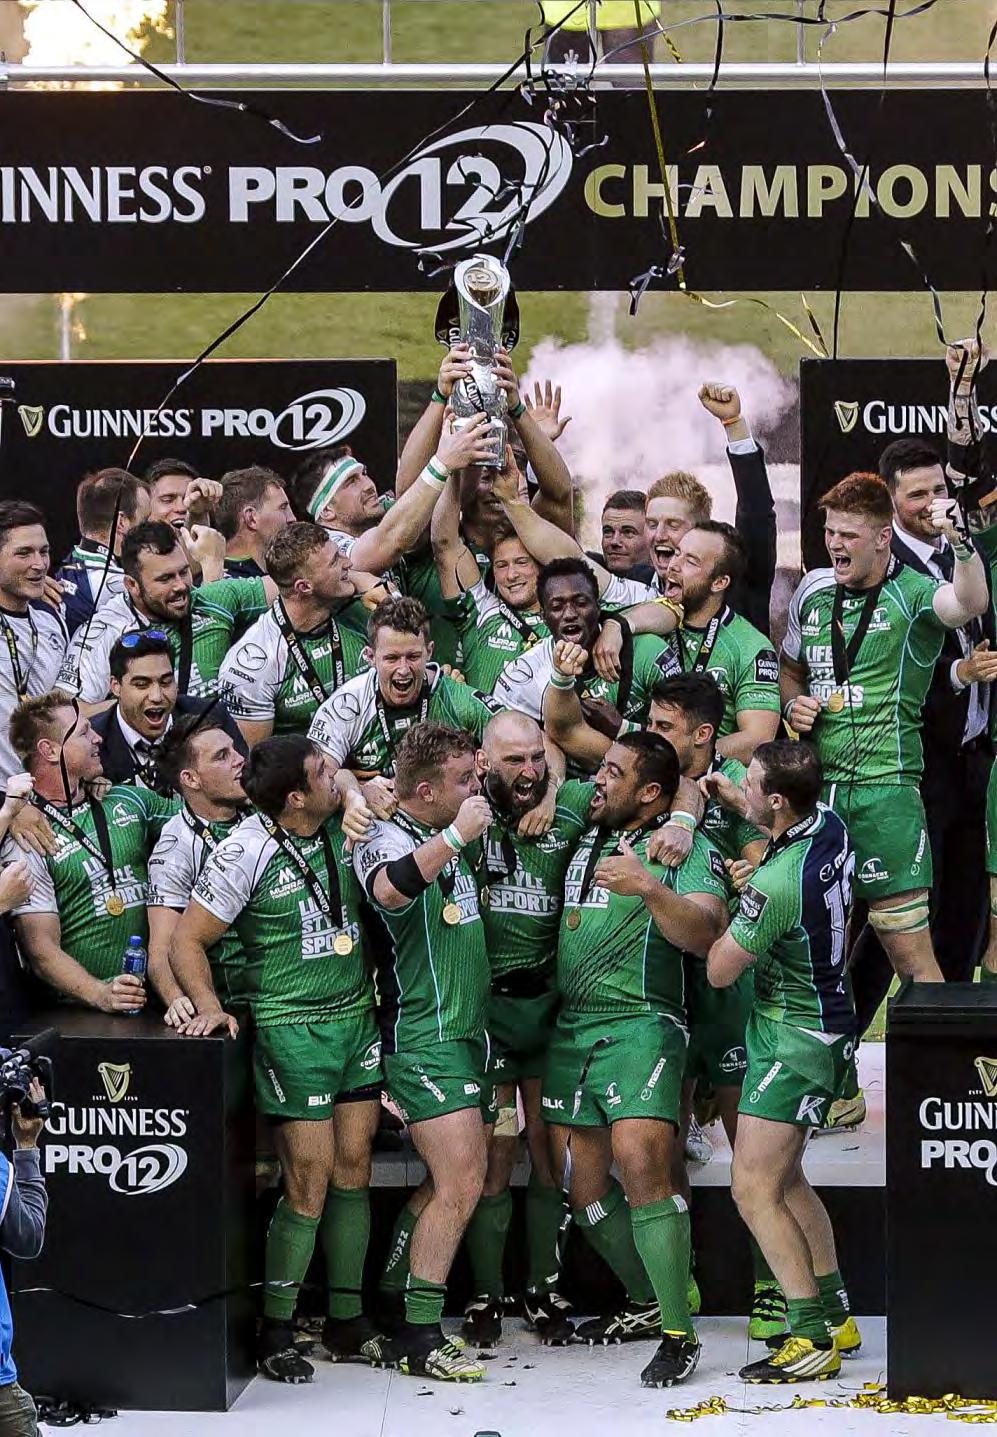 Connacht rugby A club on the rise + + + + Season ticket sales in 16-17 up by Match day ticket sales up by in 16-17 season Comprehensive strategic plan and resources allocated Strong